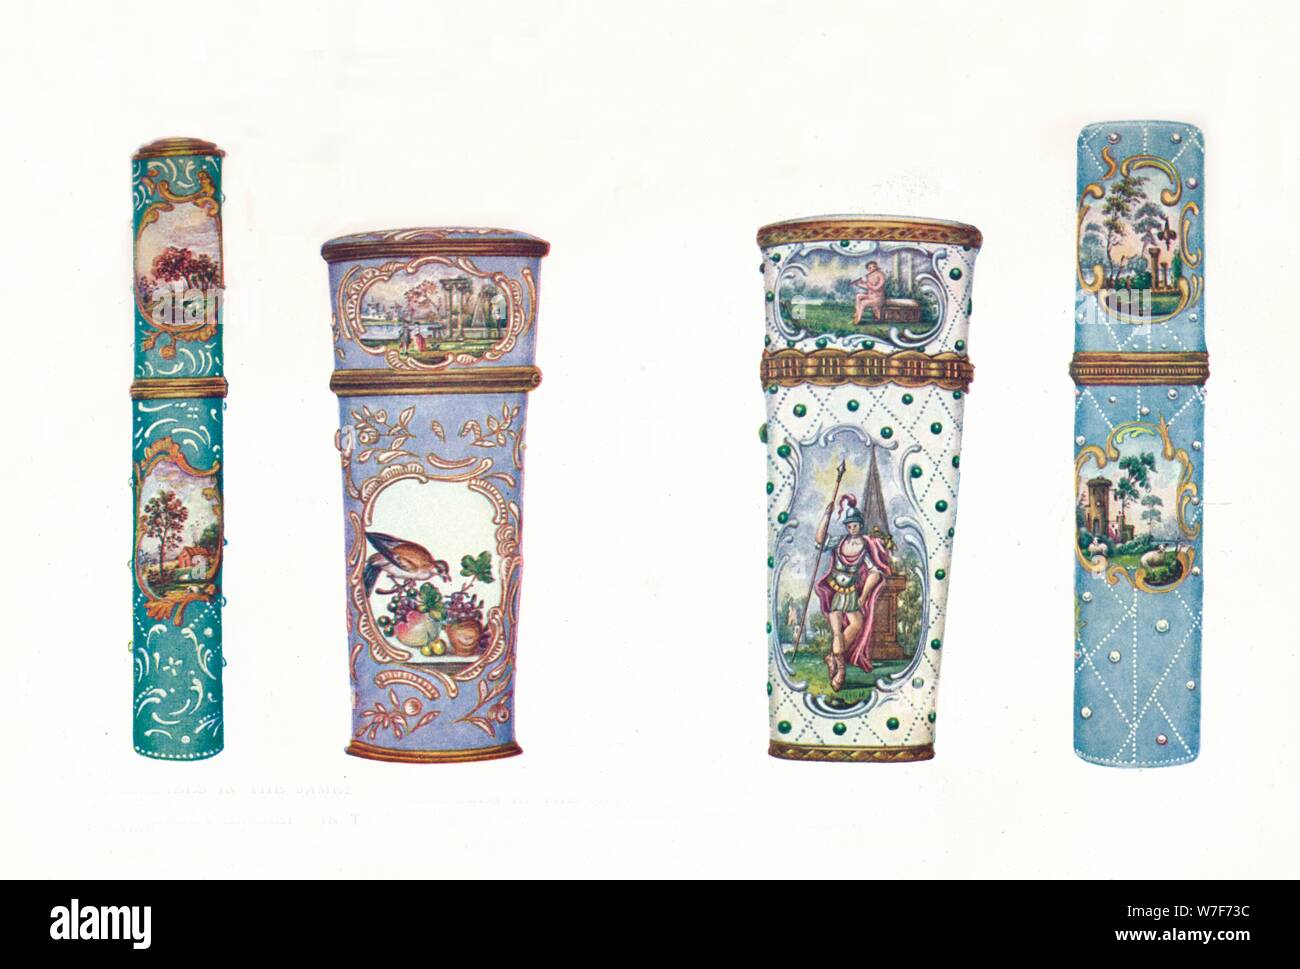 'Battersea Enamels in the James Ward Usher Collection', 1911. Artist: James Ward Usher. Stock Photo